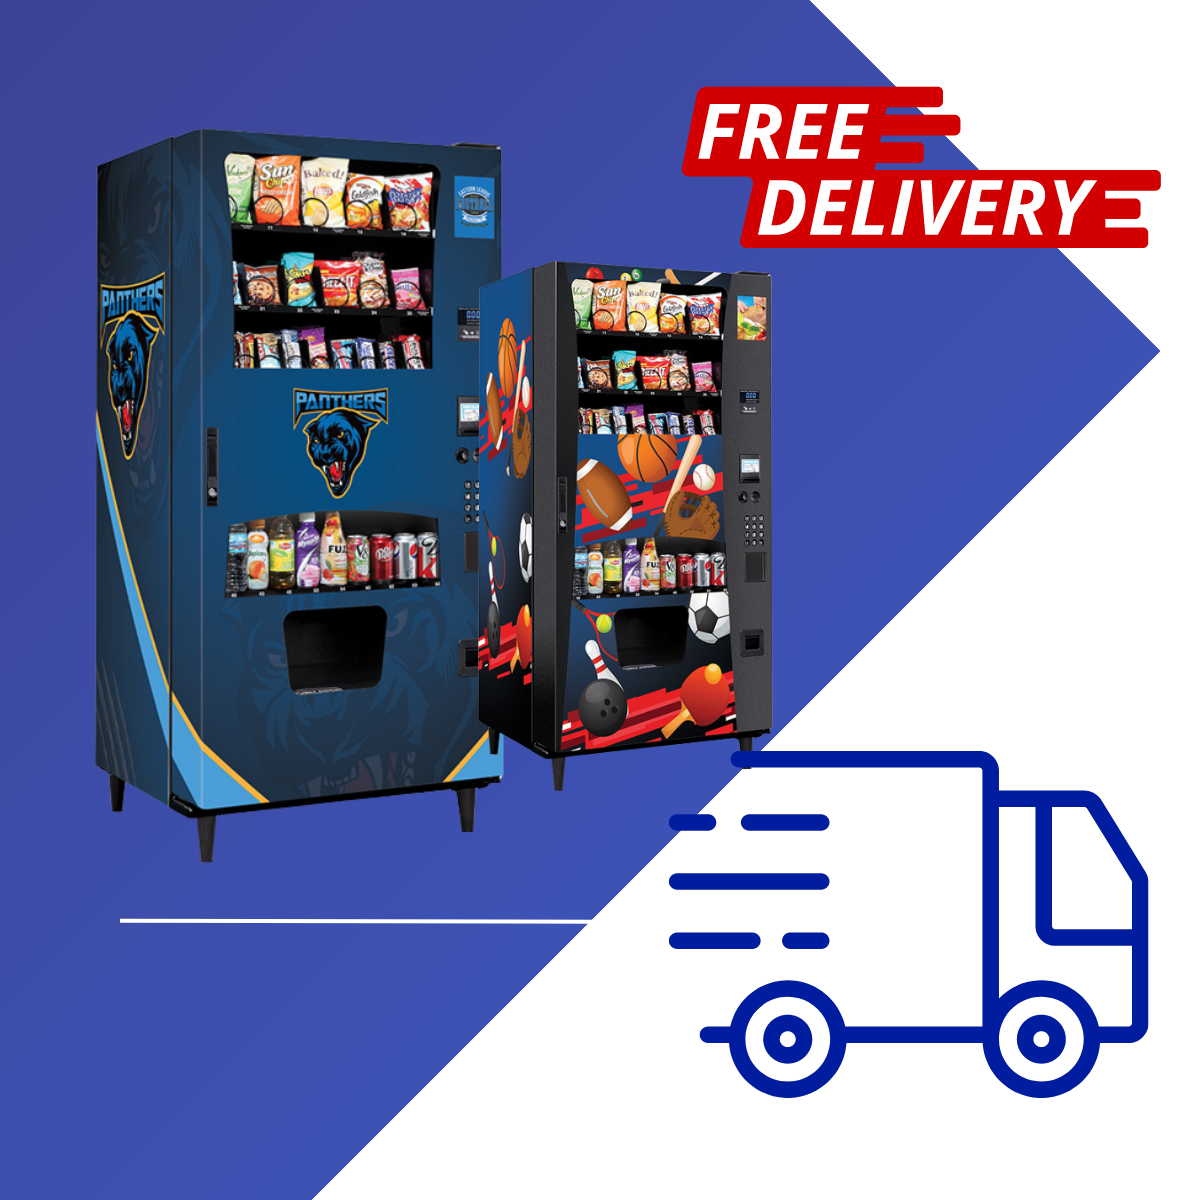 EVENDING FREE PREMIUM DELIVERY OFFER